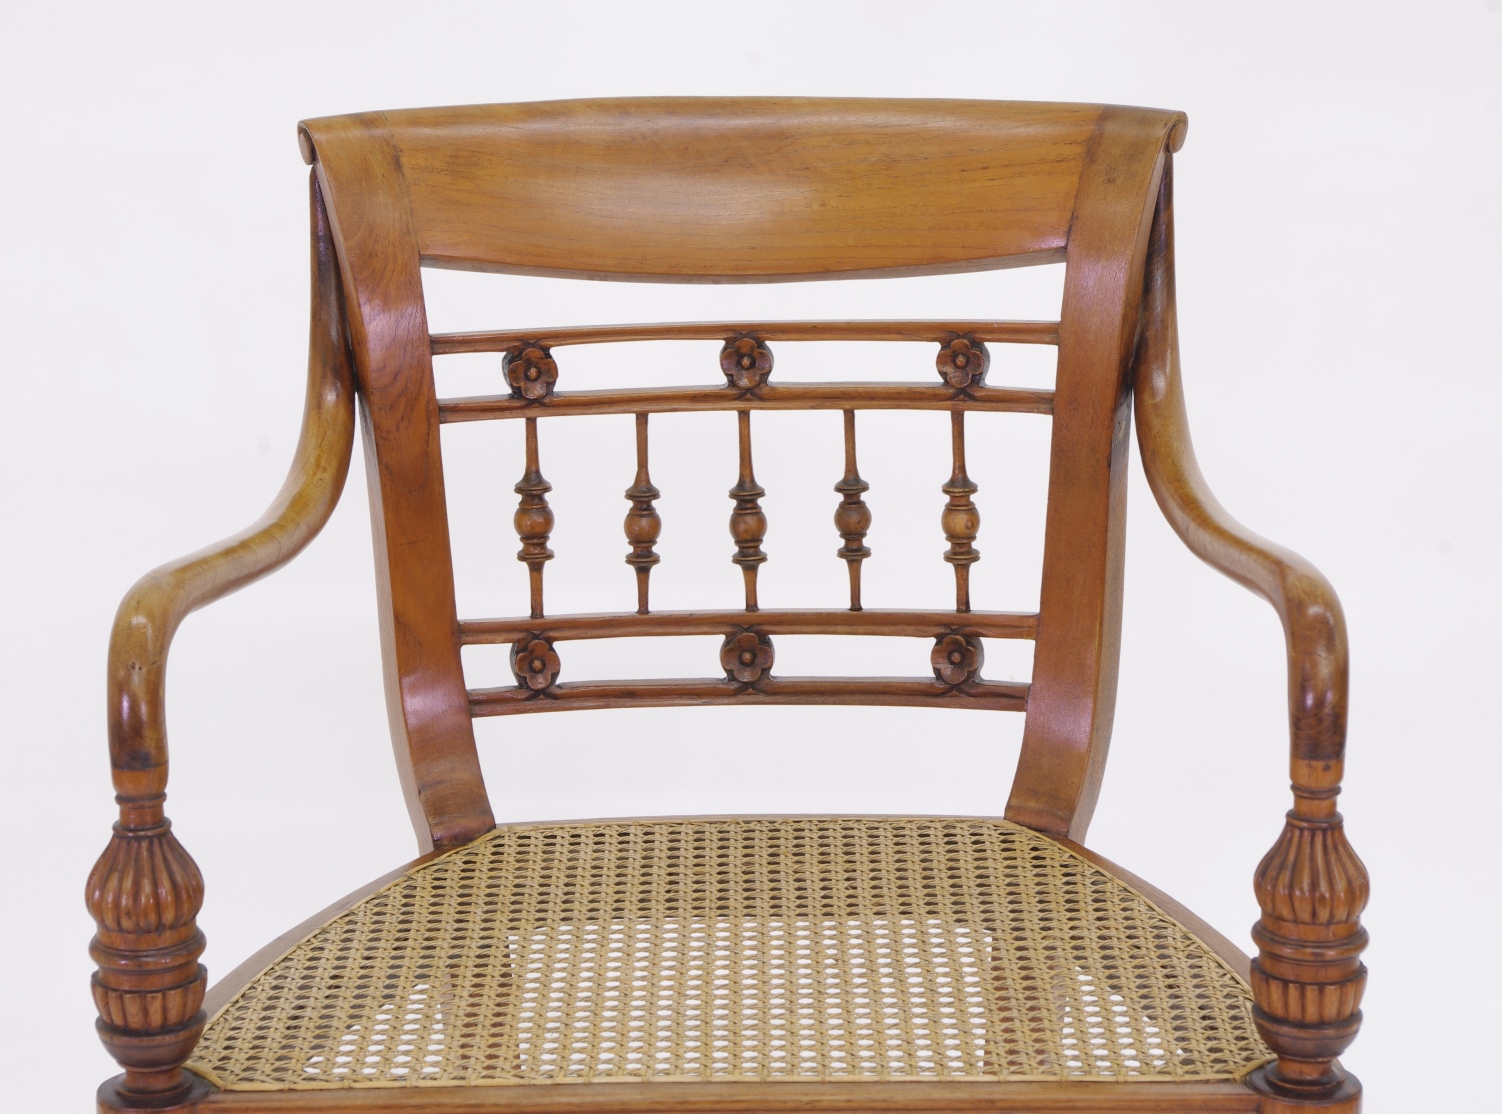 Set of Six British Colonial Dining Chairs, c. 1830